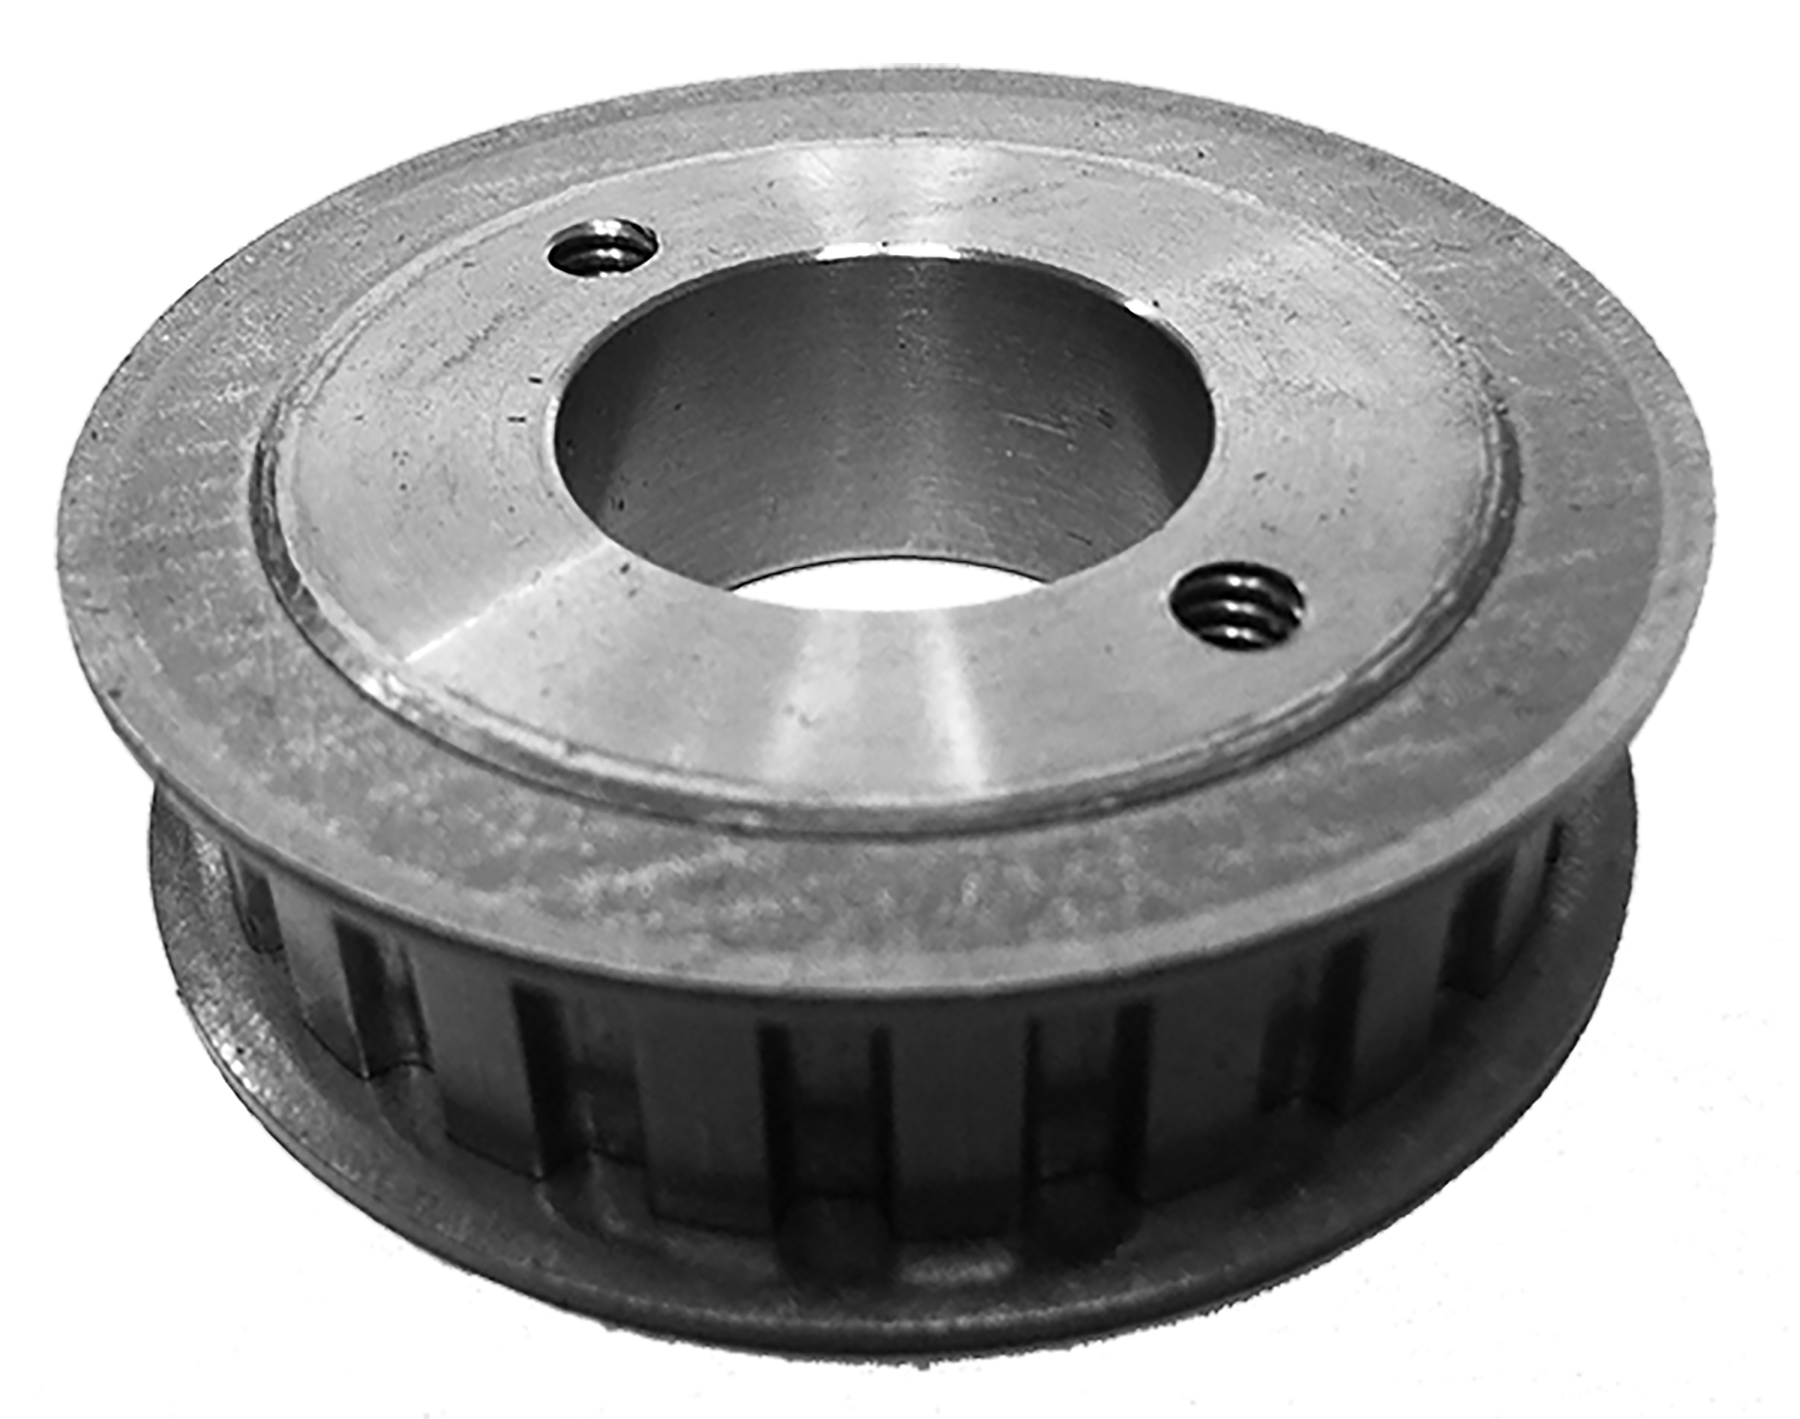 48LH050 - Cast Iron Imperial Pitch Pulleys